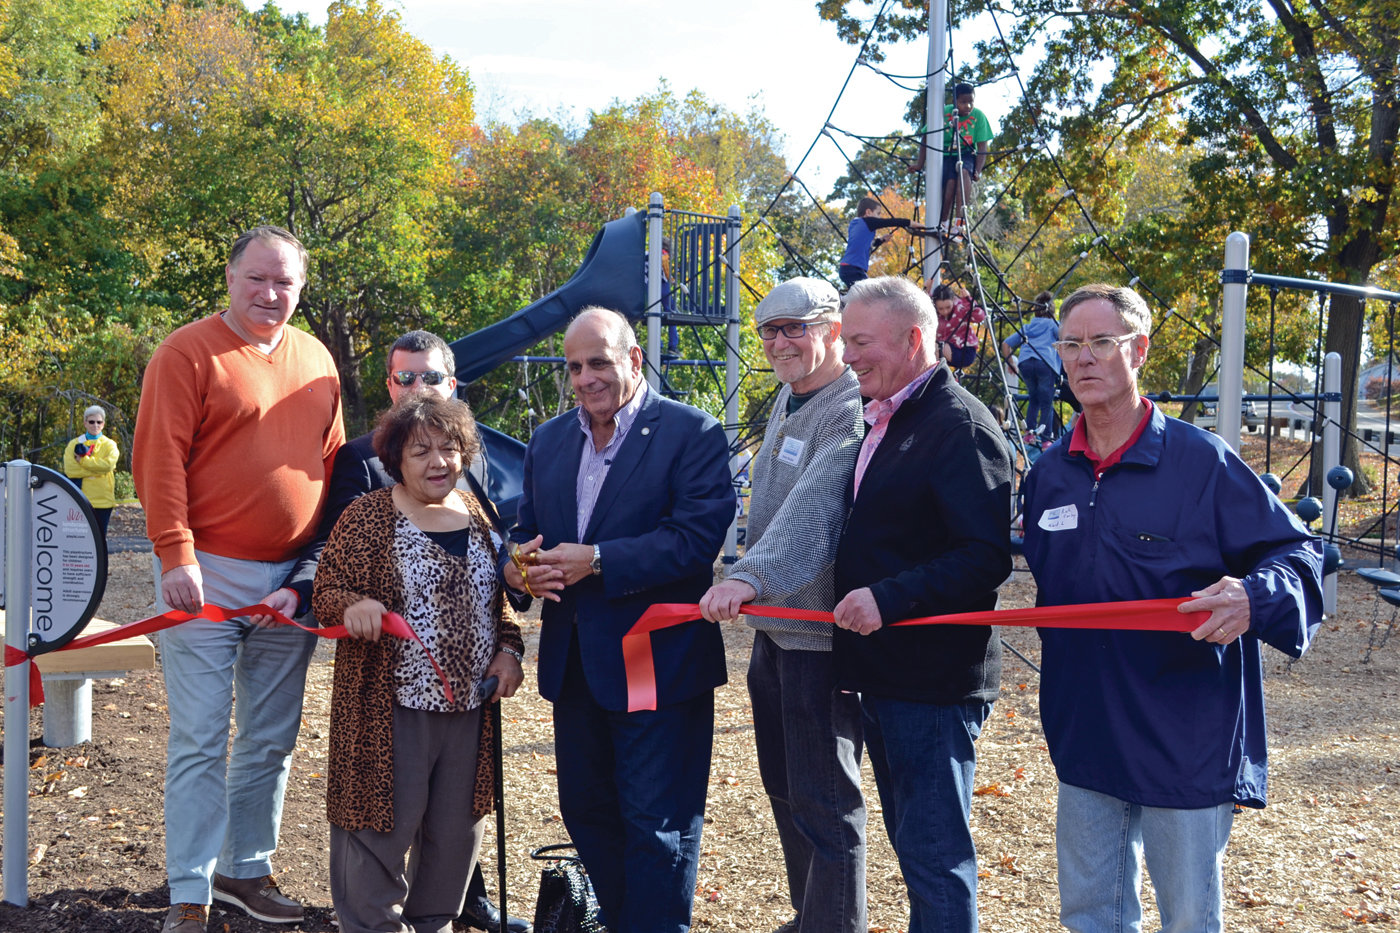 IT'S OFFICIAL: Mayor Joseph Solomon, along with Senator Michael McCaffrey, Ward 8 Councilman Anthony Sinapi, Ward 6 Councilwoman Donna Travis, Friends of Salter Grove Coordinator Peter Becker, Rep. Joseph McNamara and Ward 1 Councilman Richard Corley, snipped the ribbon officially opening the new Salter Grove Park playground. (Warwick Beacon photos)